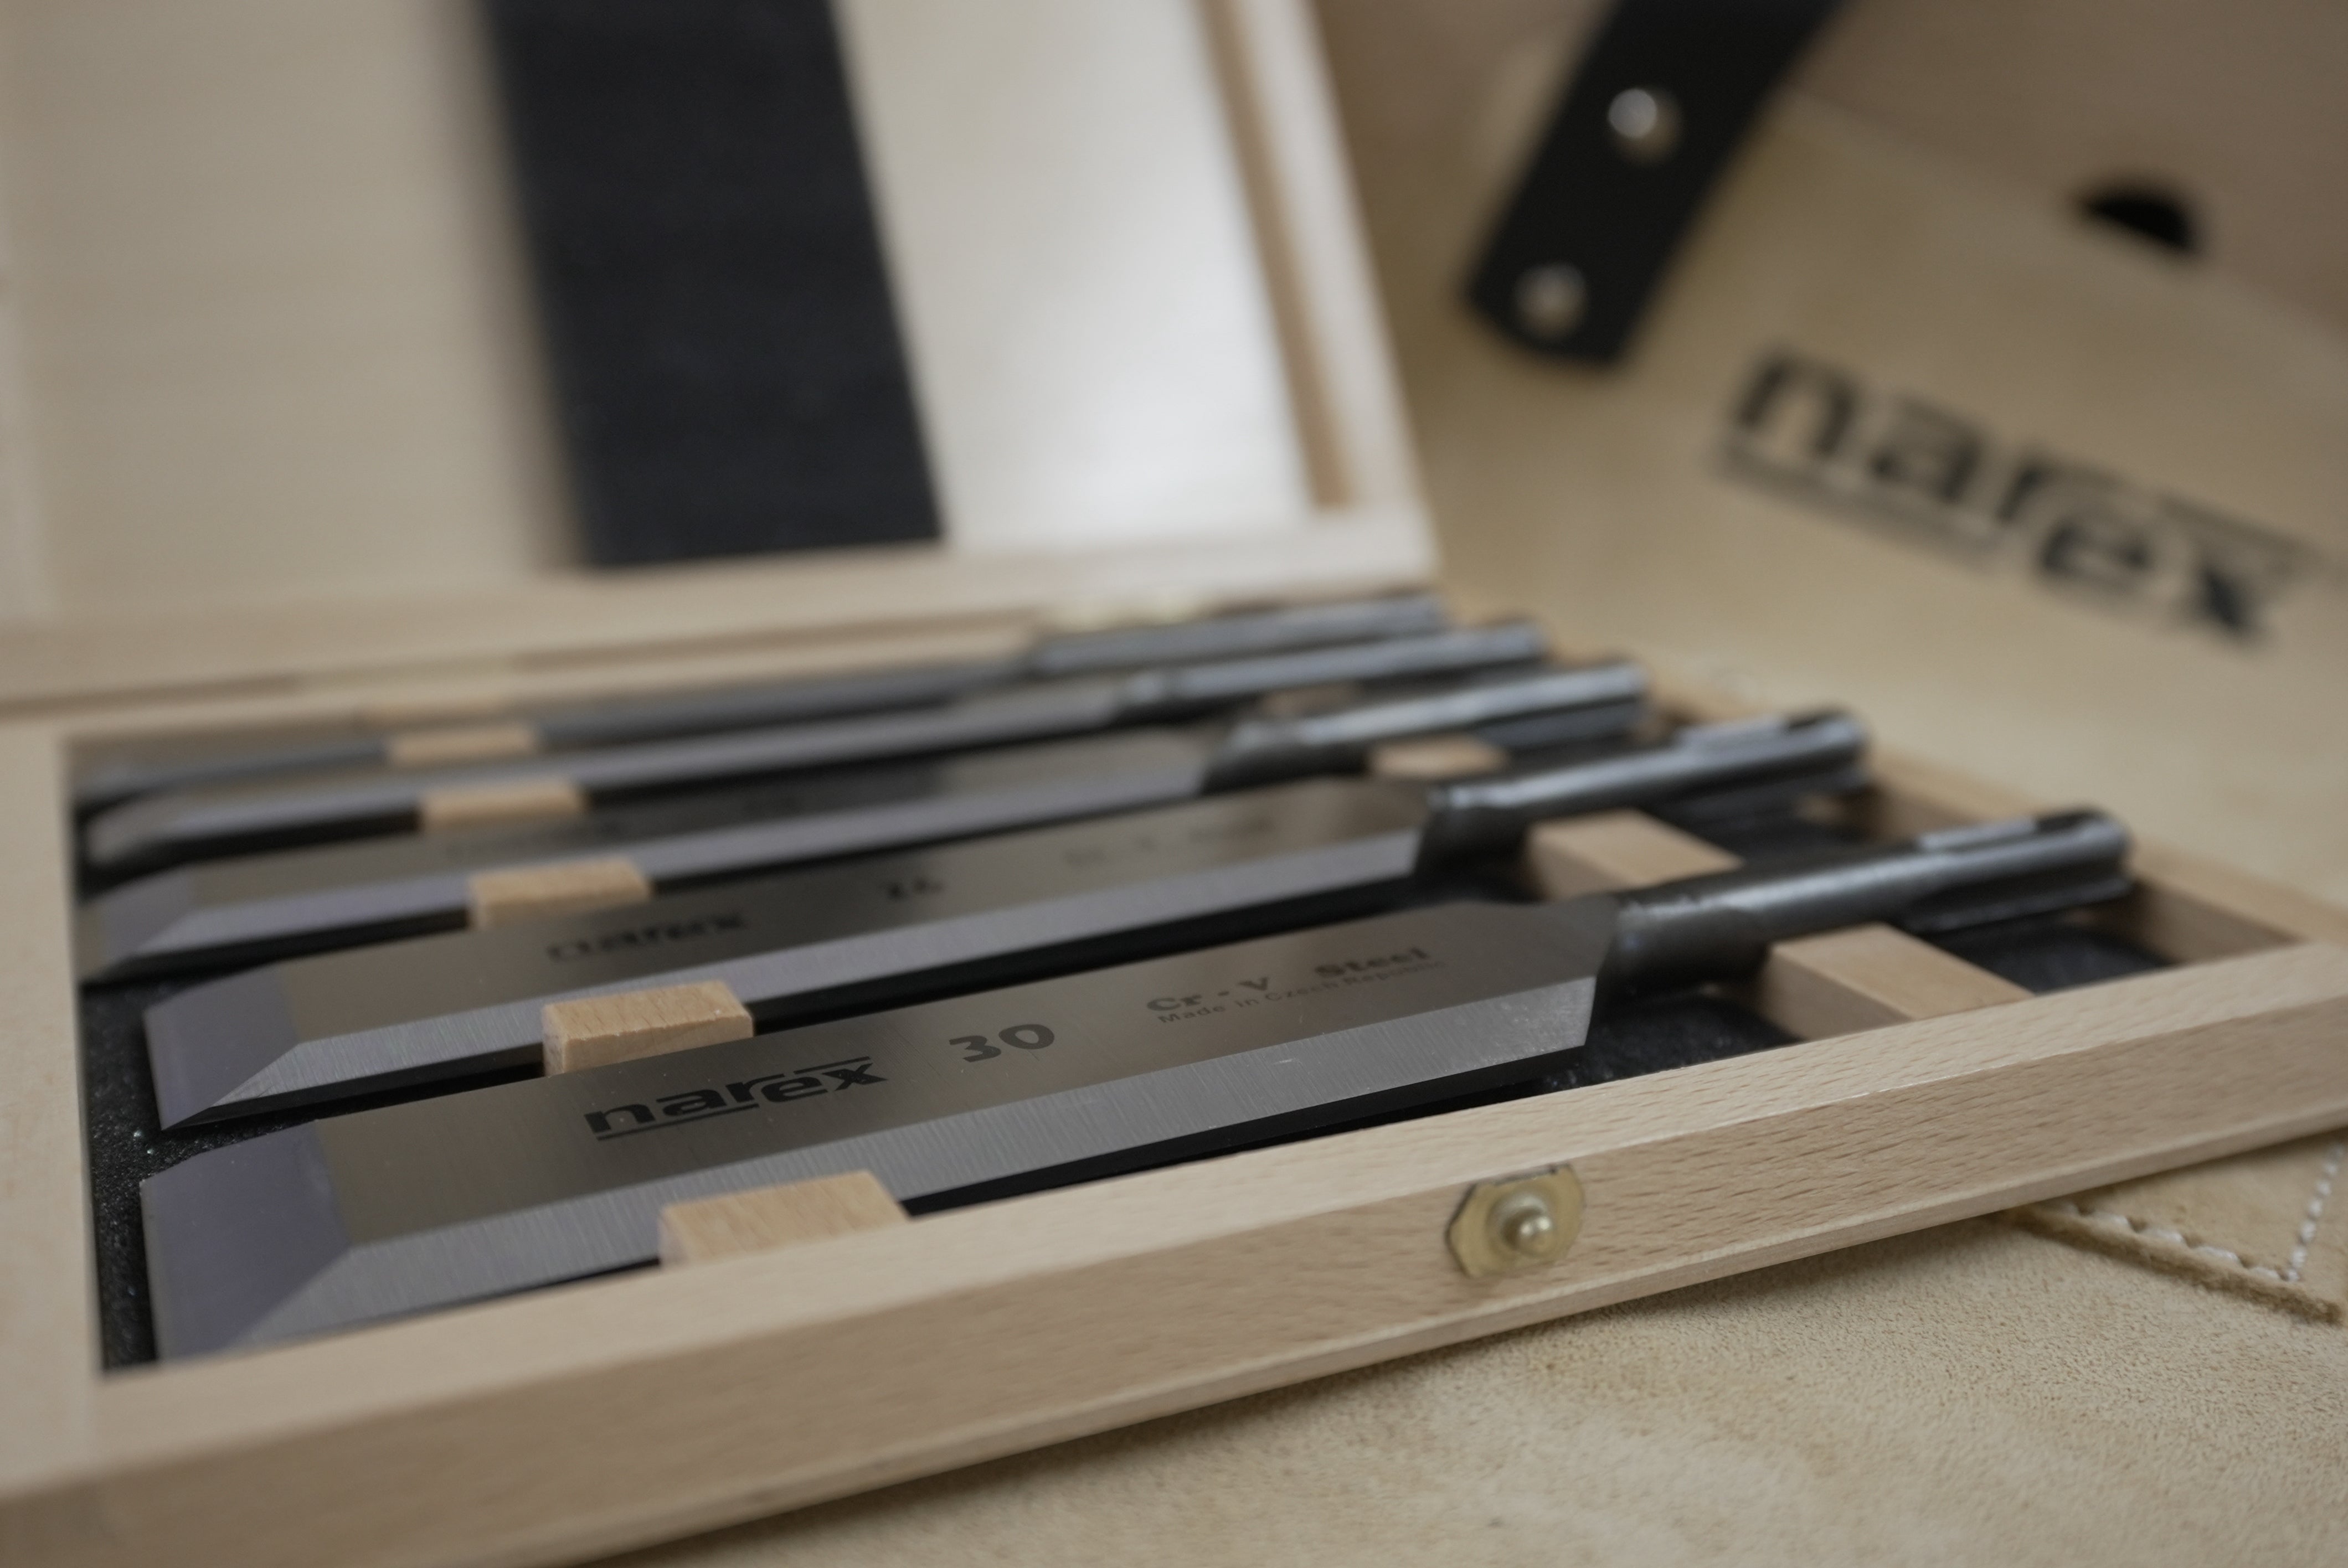 Set of Machine Chisels with Shank Mount 5pce (10mm / 14mm / 20mm / 26mm / 30mm) in Wooden Box 853901 by Narex